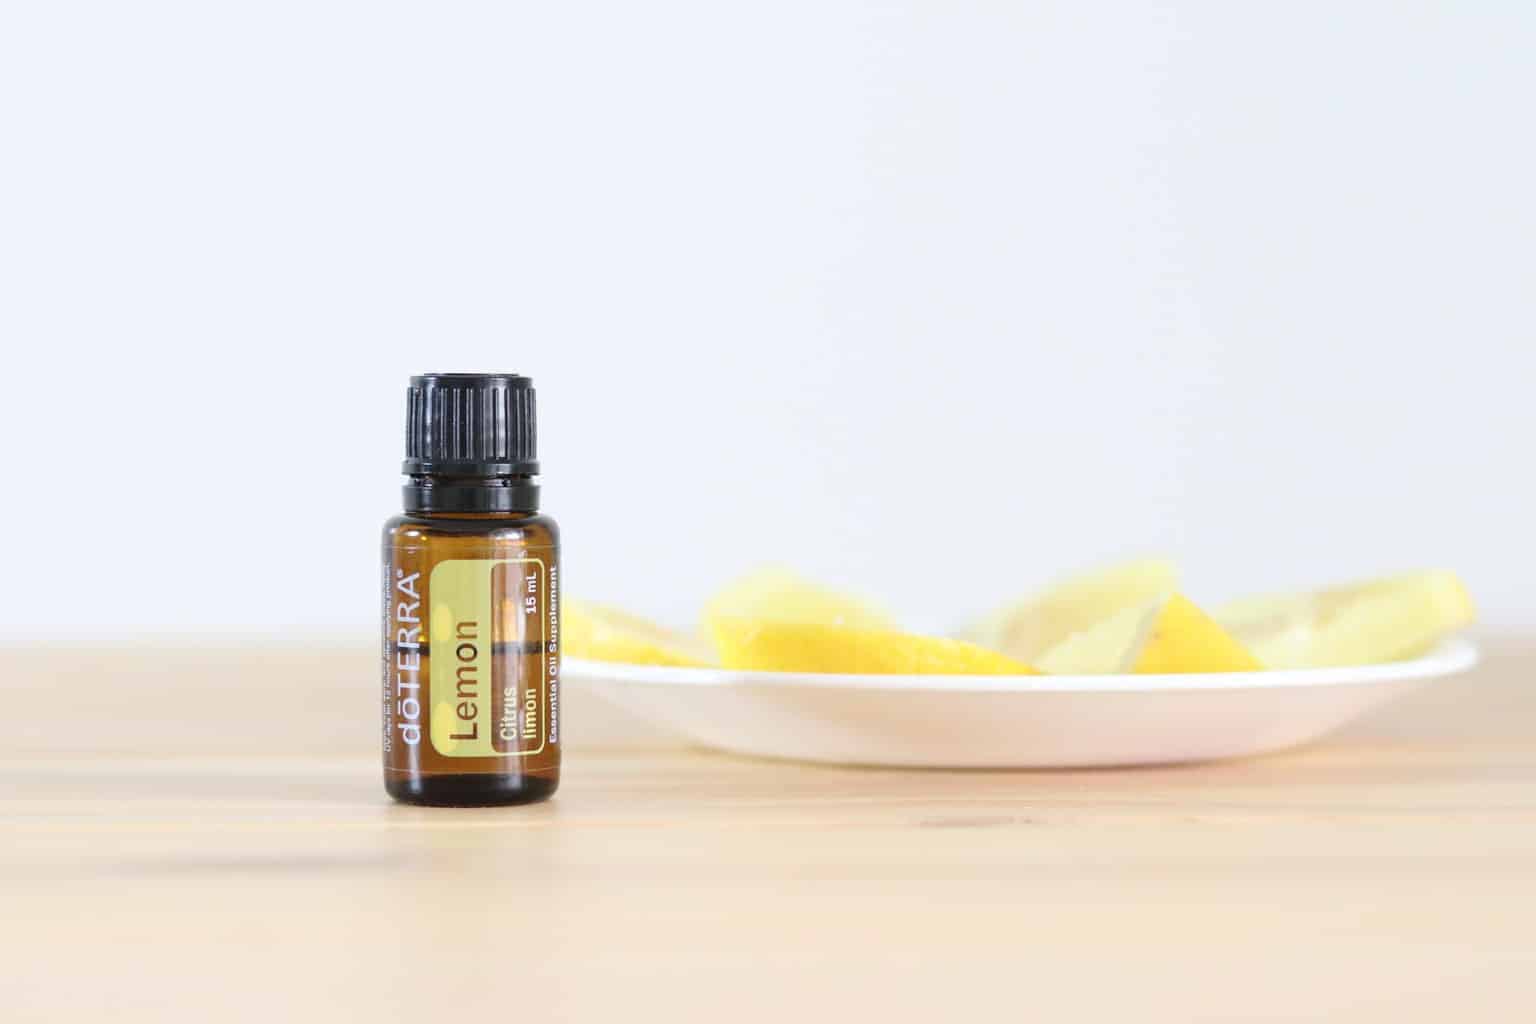 Learn how to use lemon essential oil safely and effectively in your home.